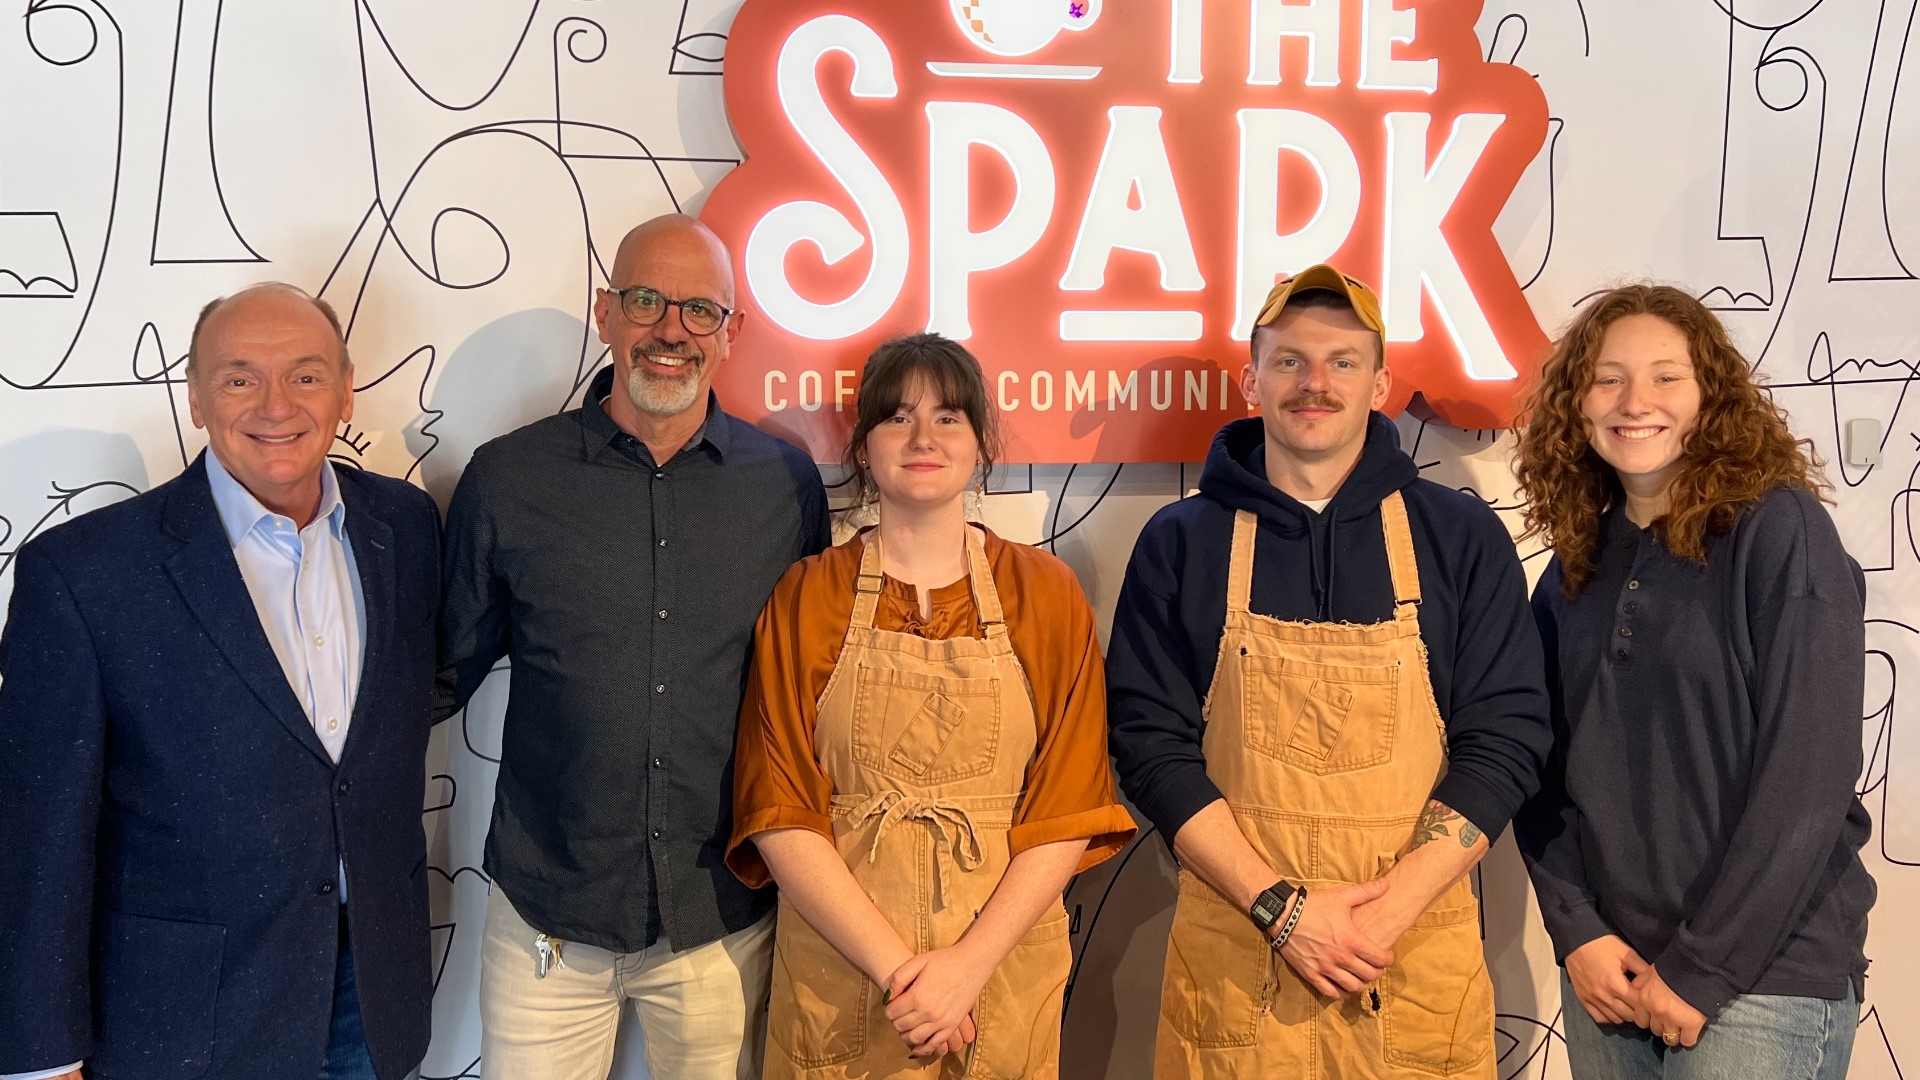 The Spark is a coffee shop in downtown Speedway that serves up a heaping dose of coffee, baked goods and community.